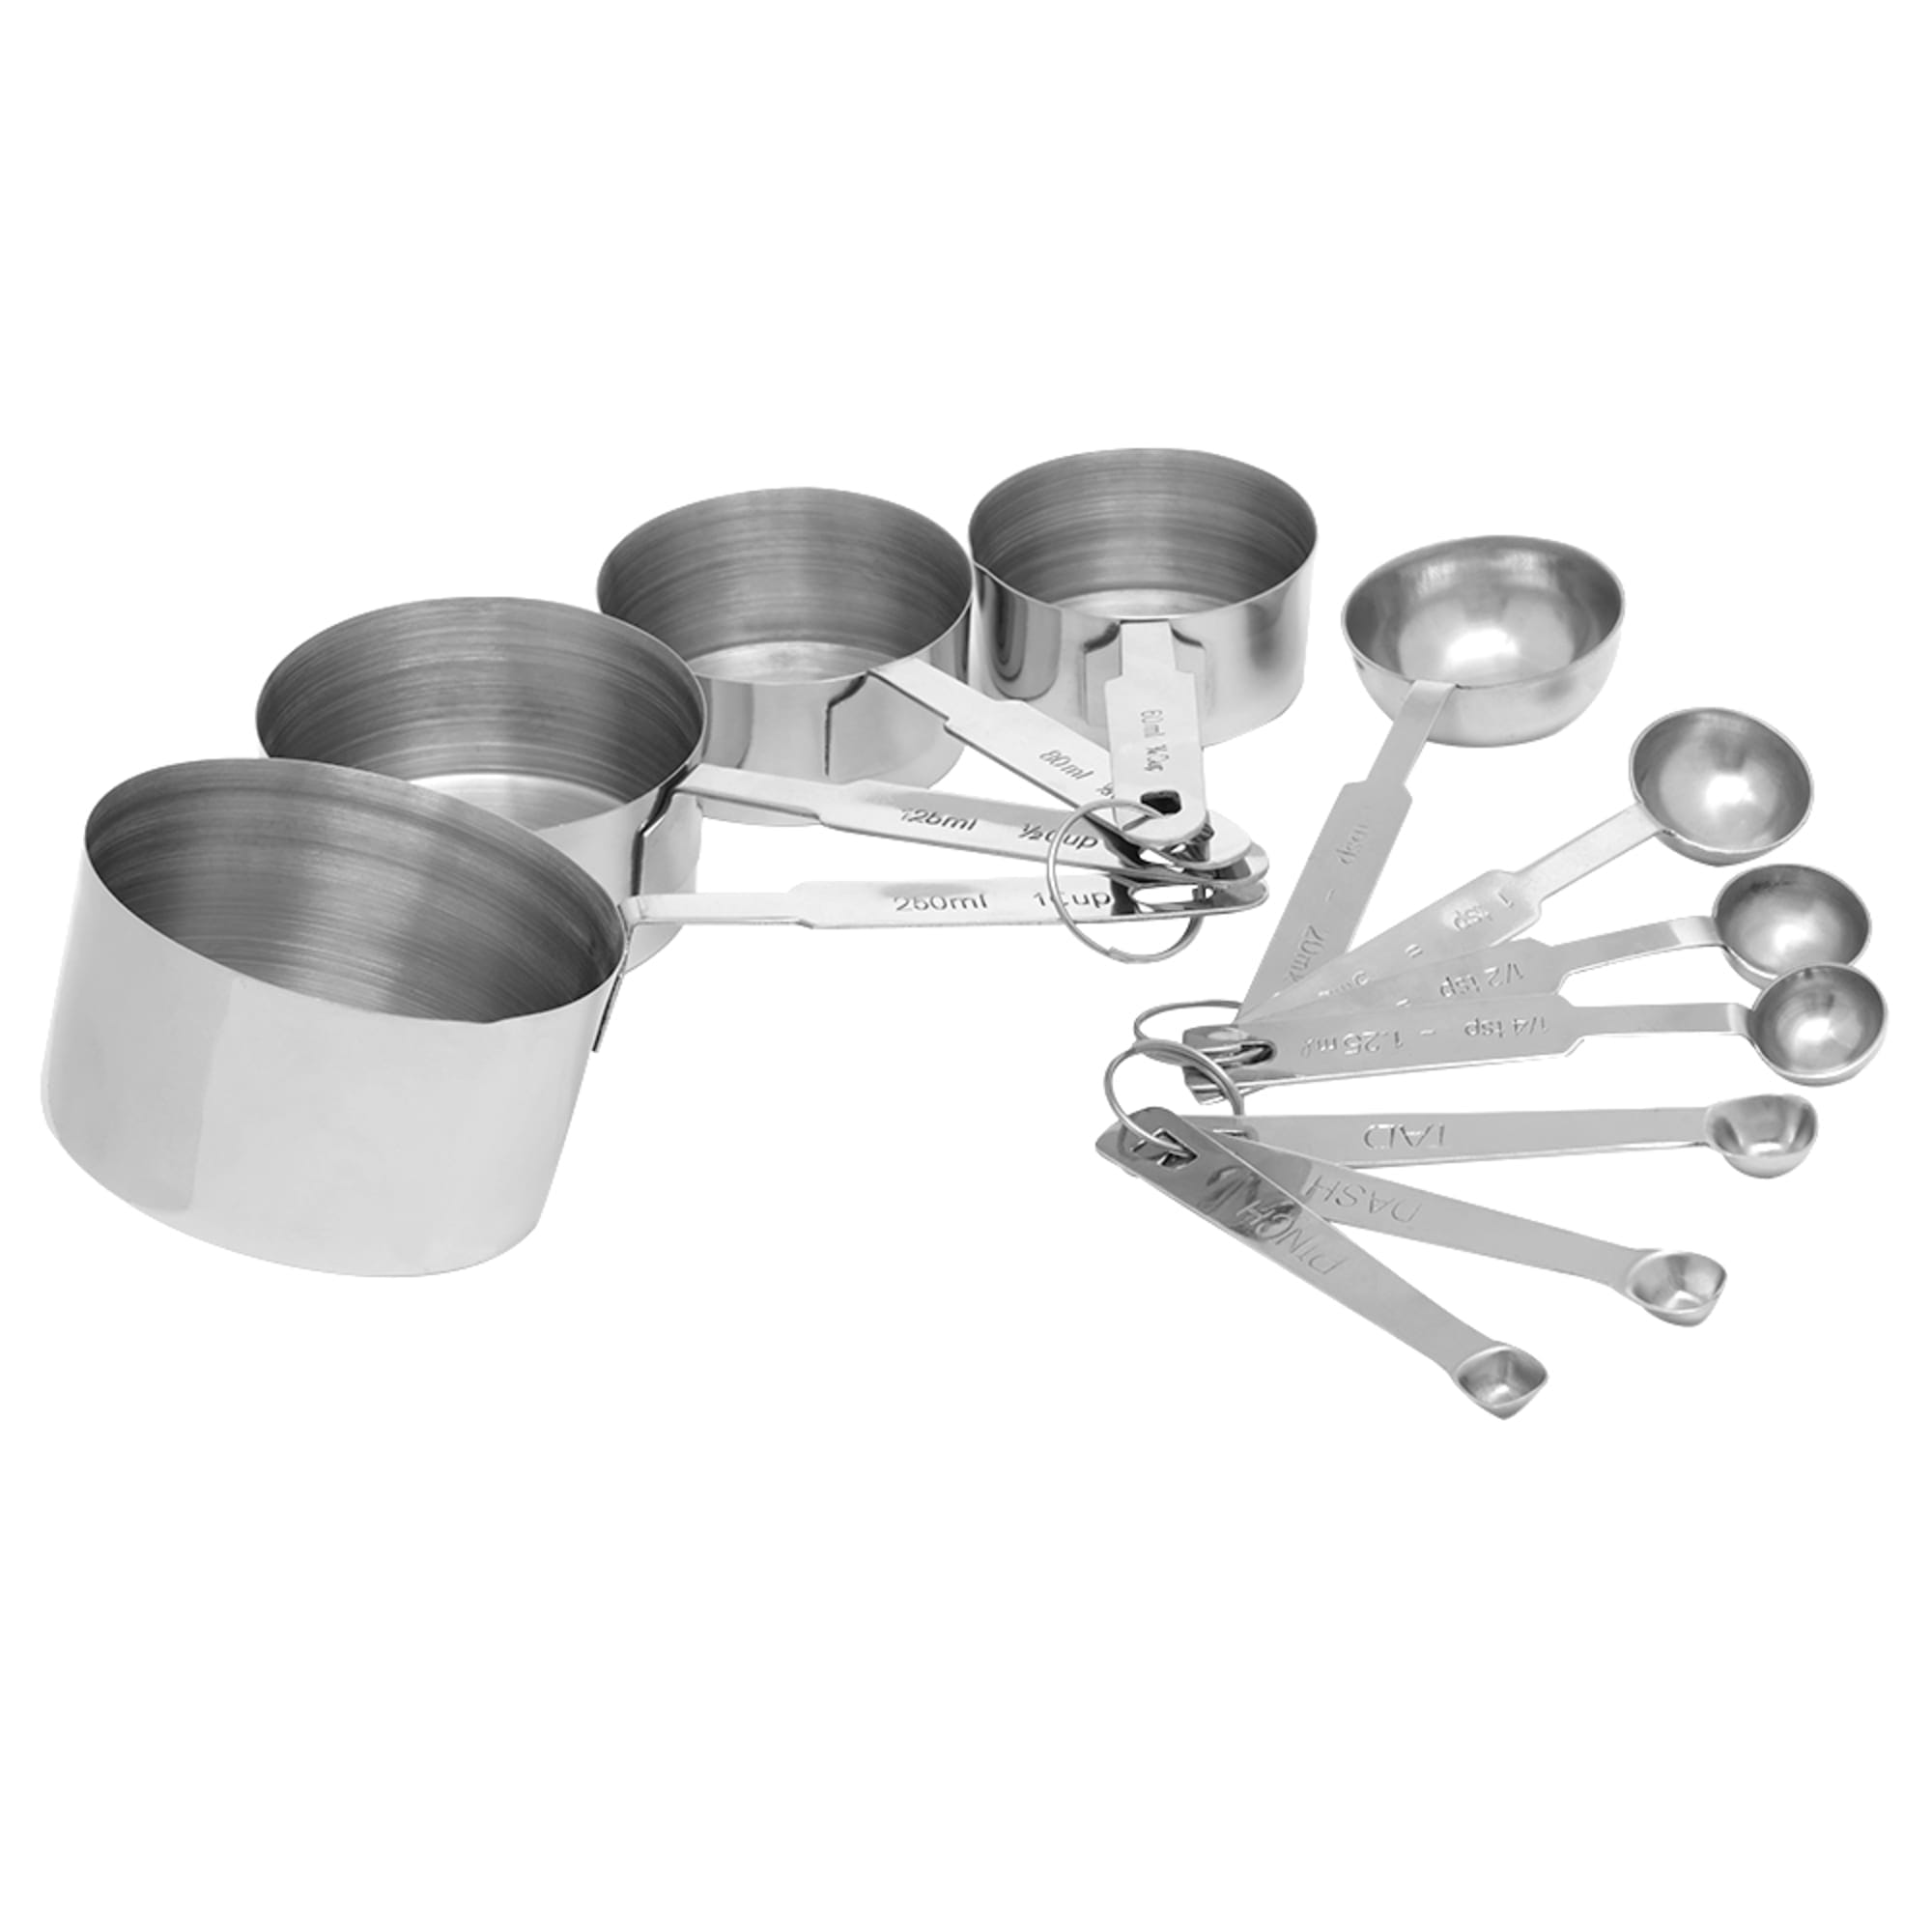 Home Basics 11 Piece Stainless Steel Measuring Cups and Spoons Set $8.00 EACH, CASE PACK OF 24